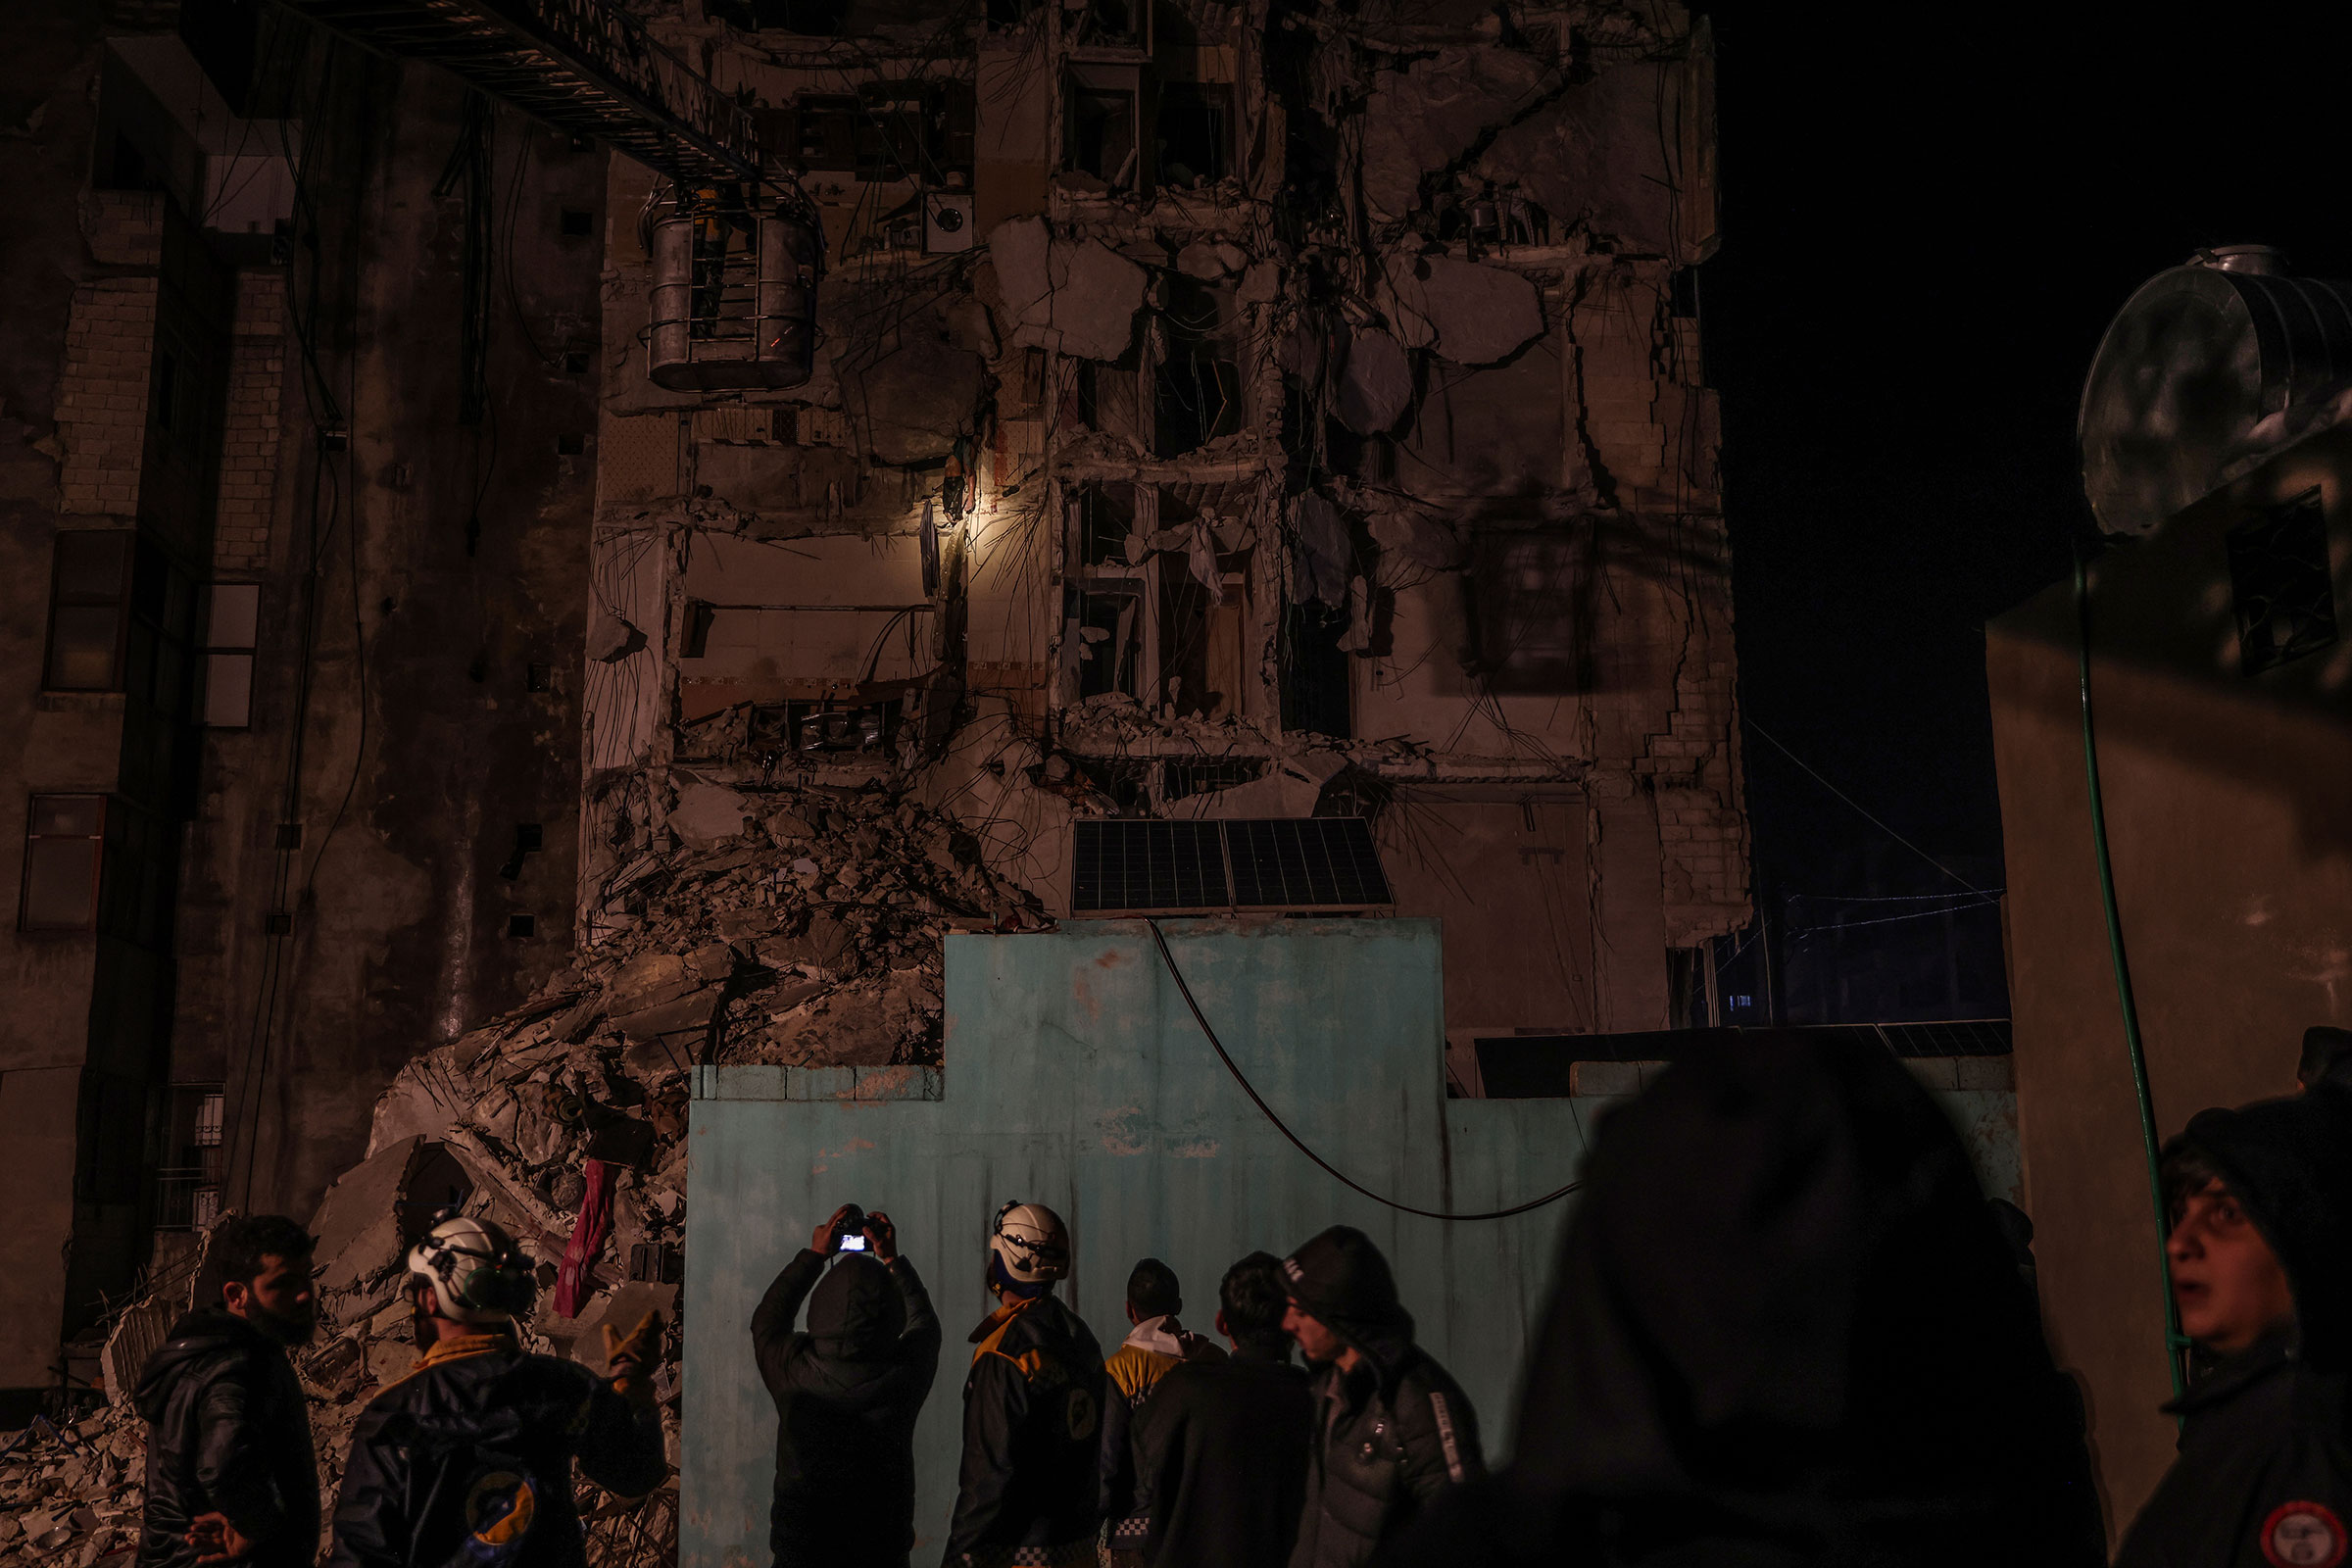 Syrian civilians and members of the White Helmets work to save people trapped beneath a destroyed building following a magnitude 7.8 earthquake that hit Syria, on Feb. 6 2023. (Anas Alkharboutli—picture-alliance/dpa/AP)